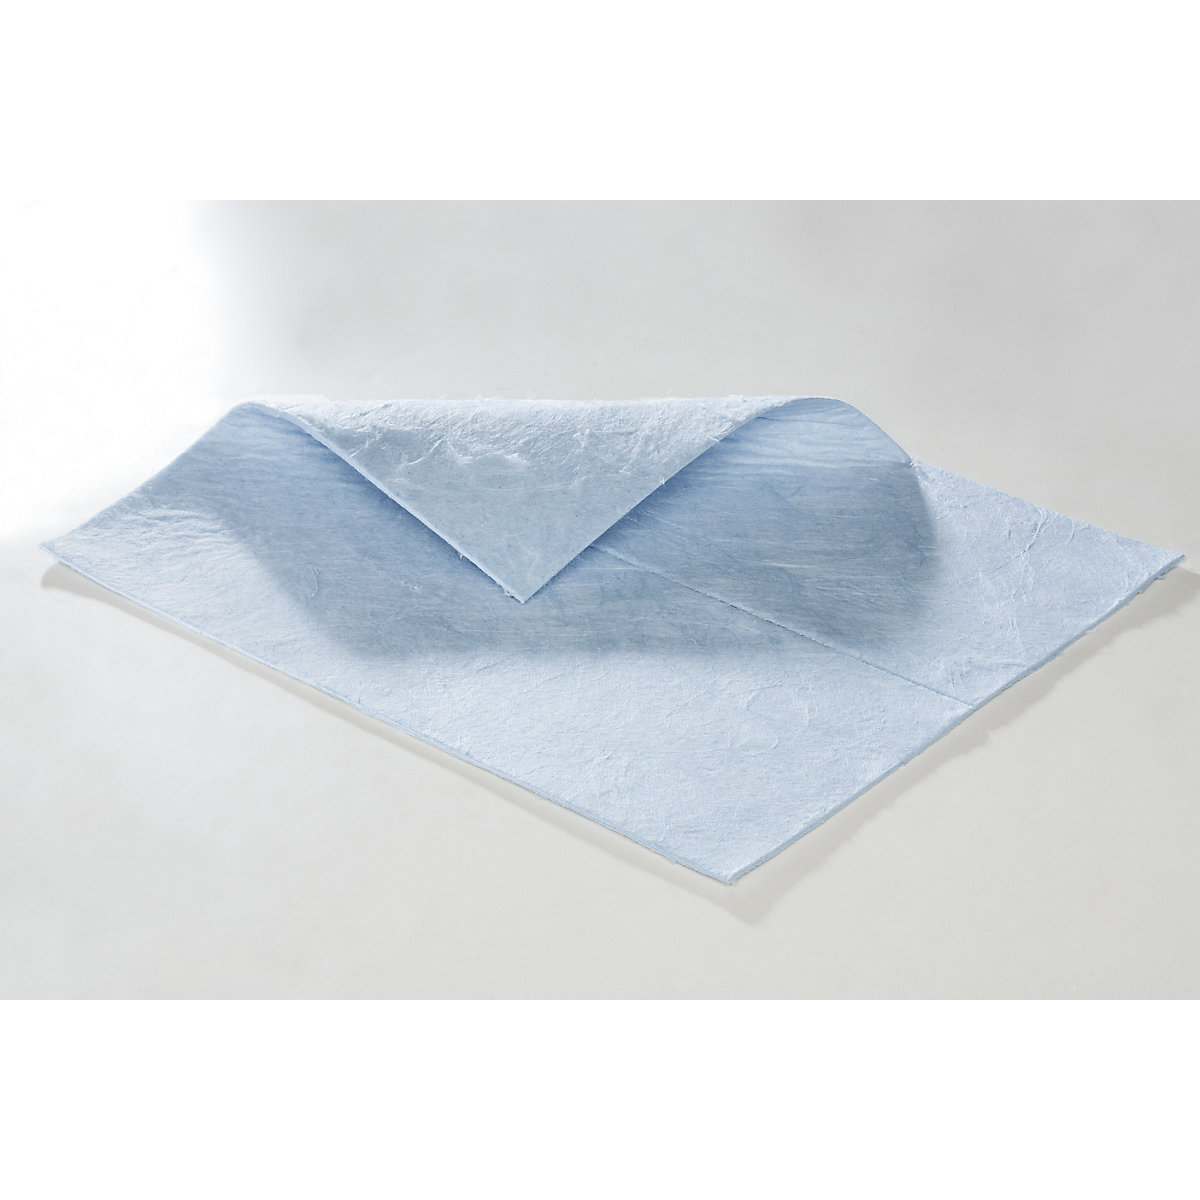 FIRST absorbent sheeting, sheets, heavy version, for oil, 500 x 400 mm, blue, pack of 100-10